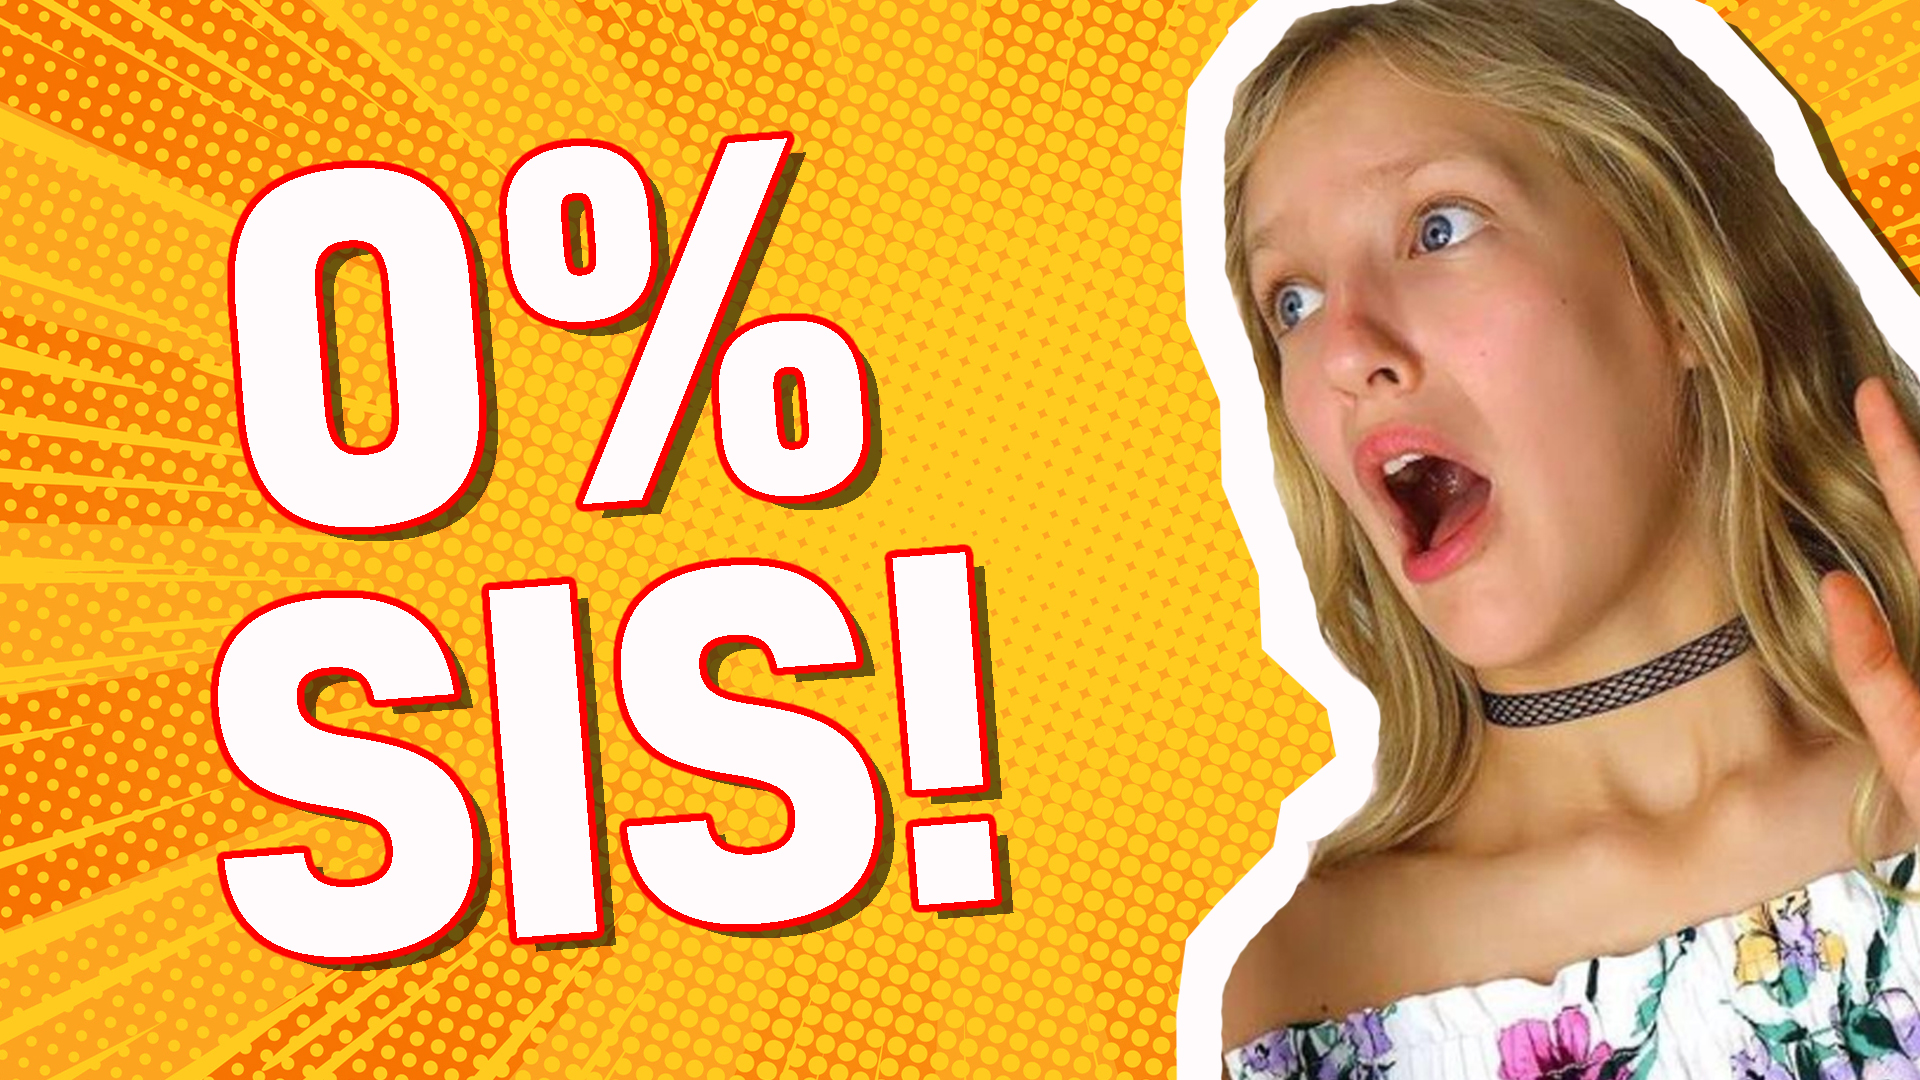 You are: 0% SIS!